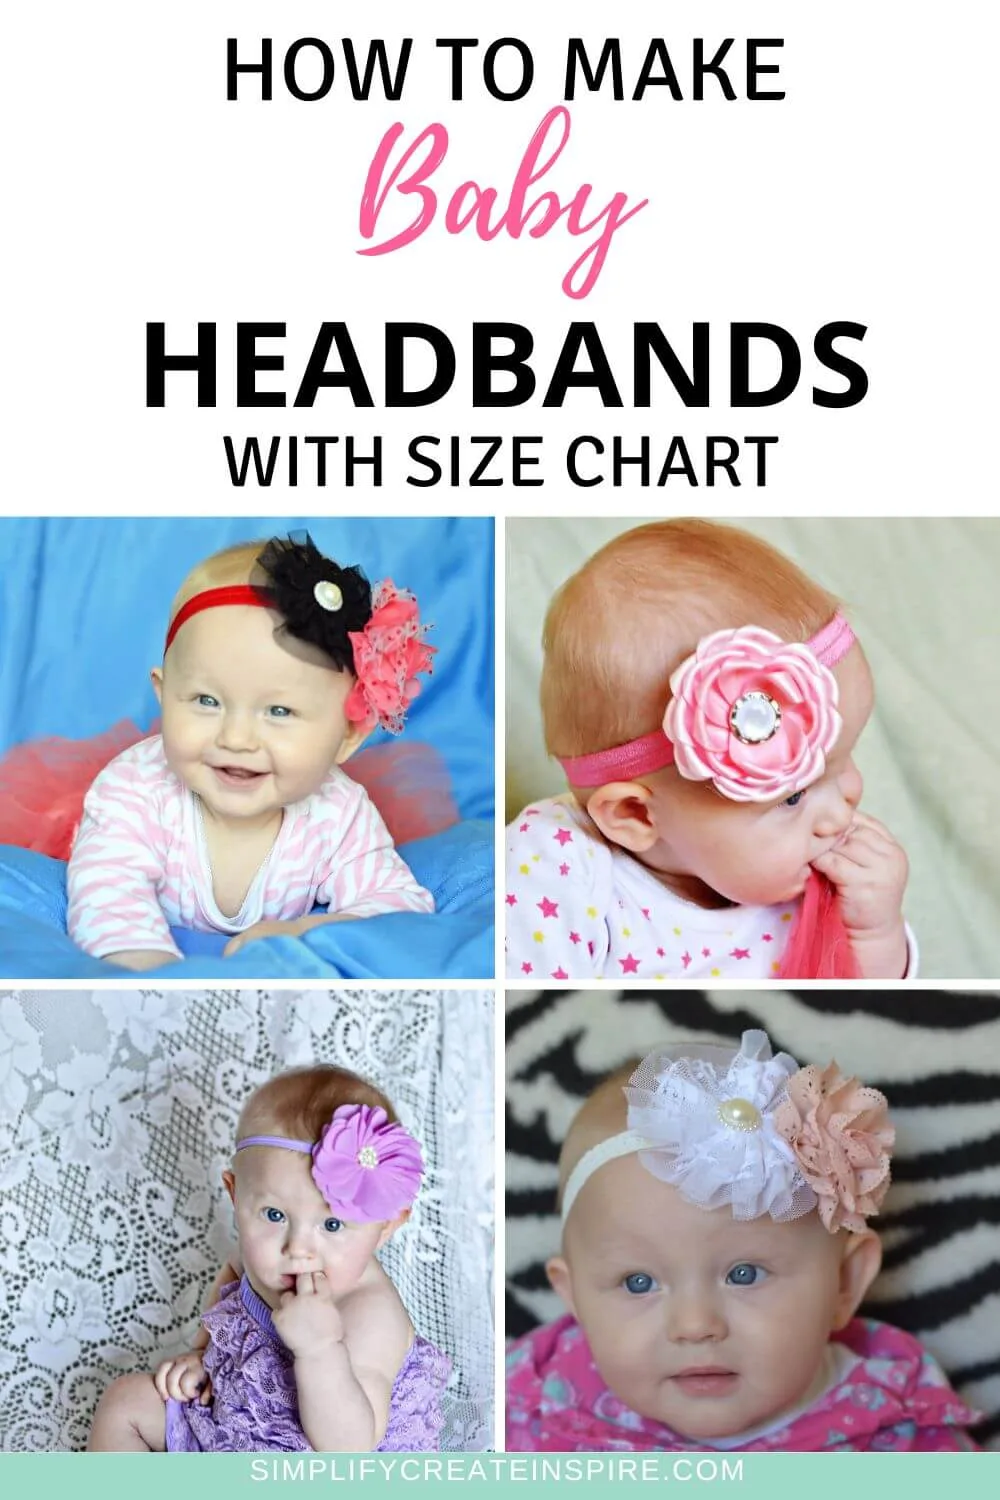 How To Make Baby Headbands + Sizing Chart | Simplify Create Inspire